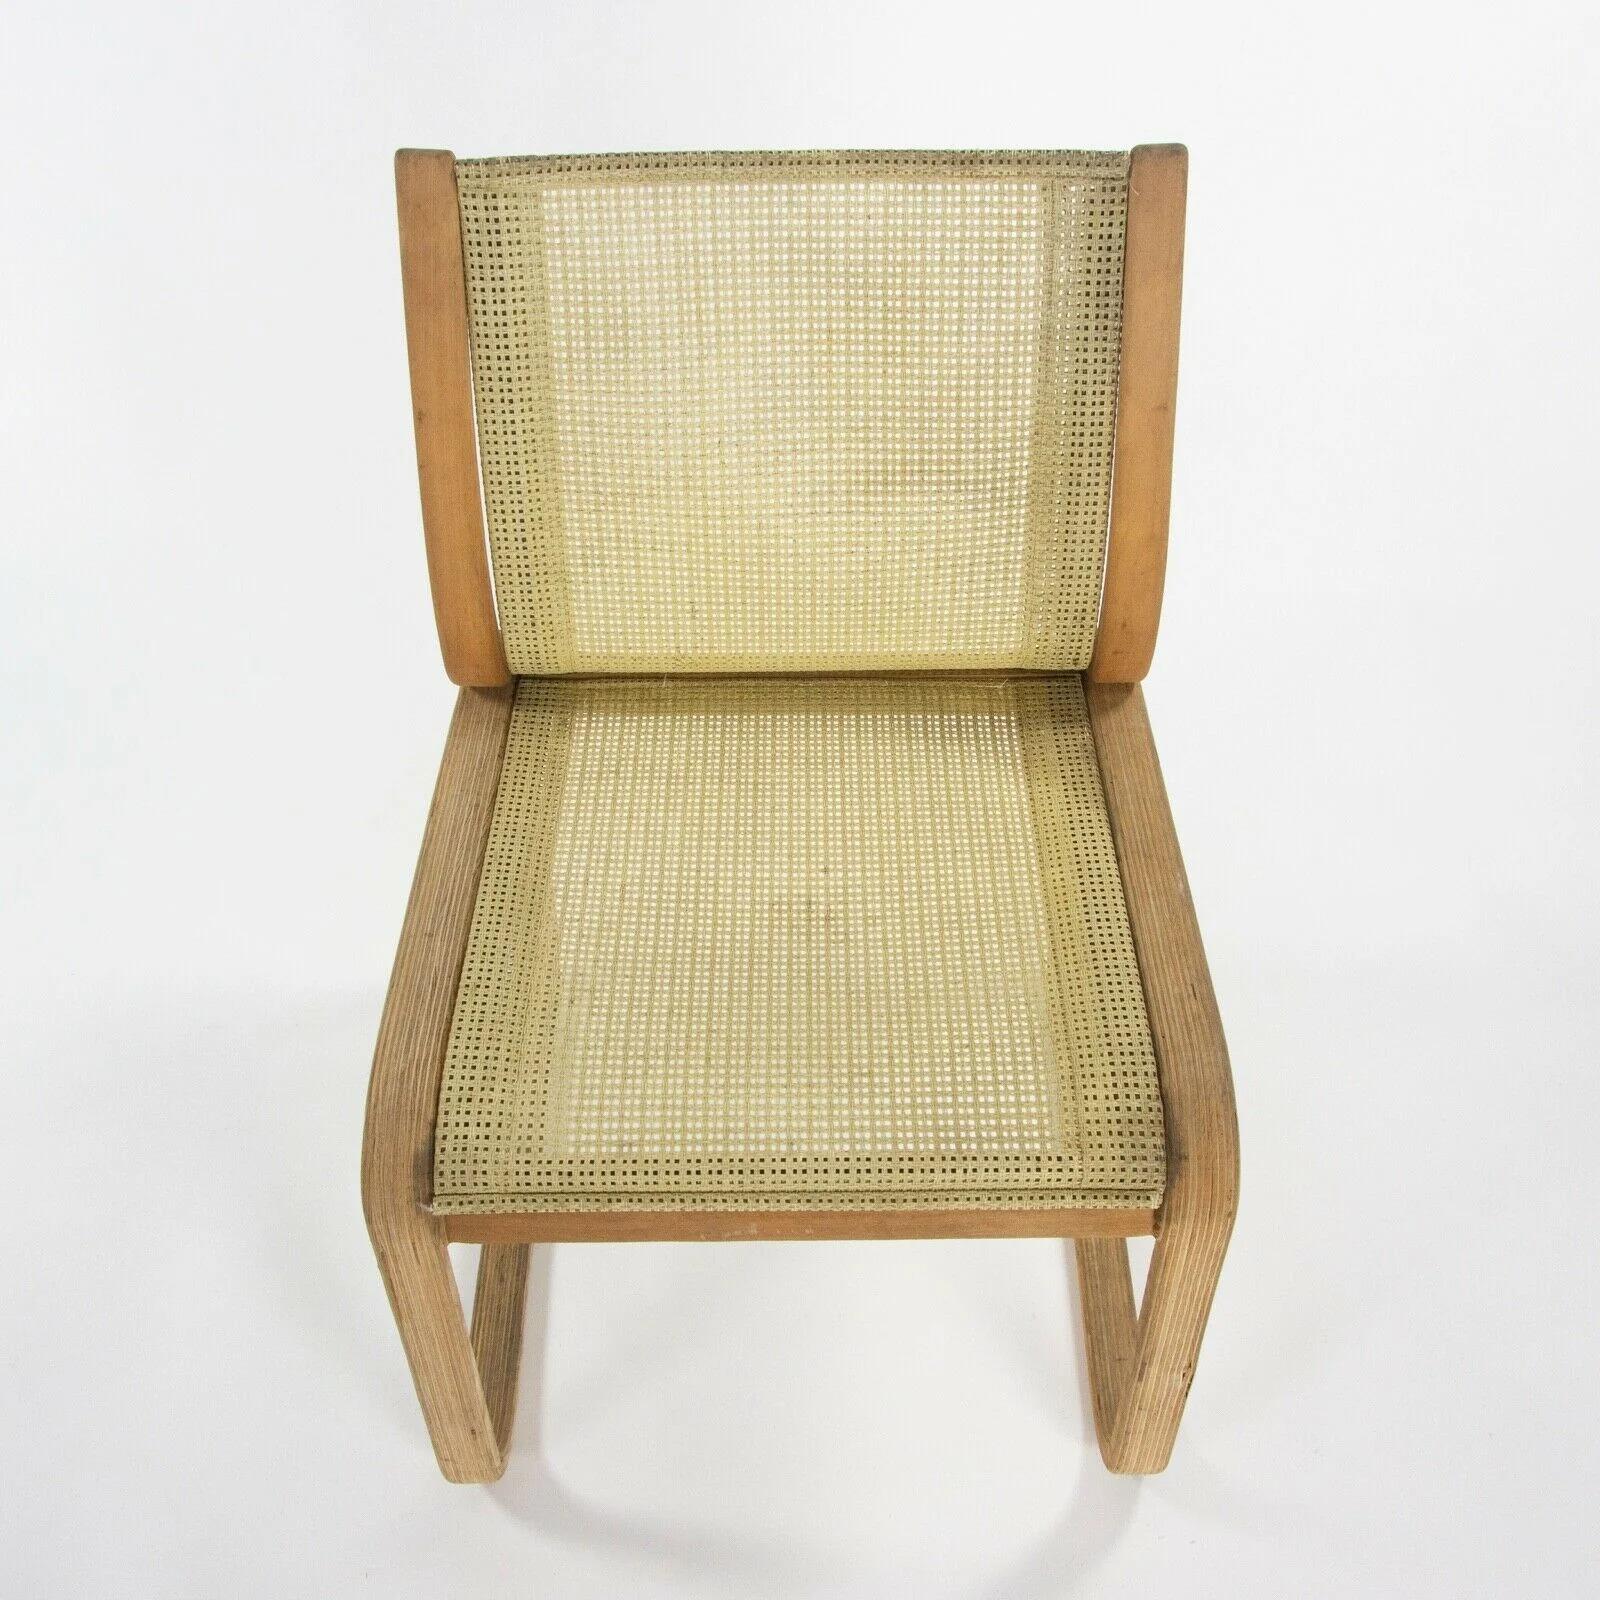 1985 Prototype Richard Schultz Wooden Outdoor Collection Dining Chair For Sale 4